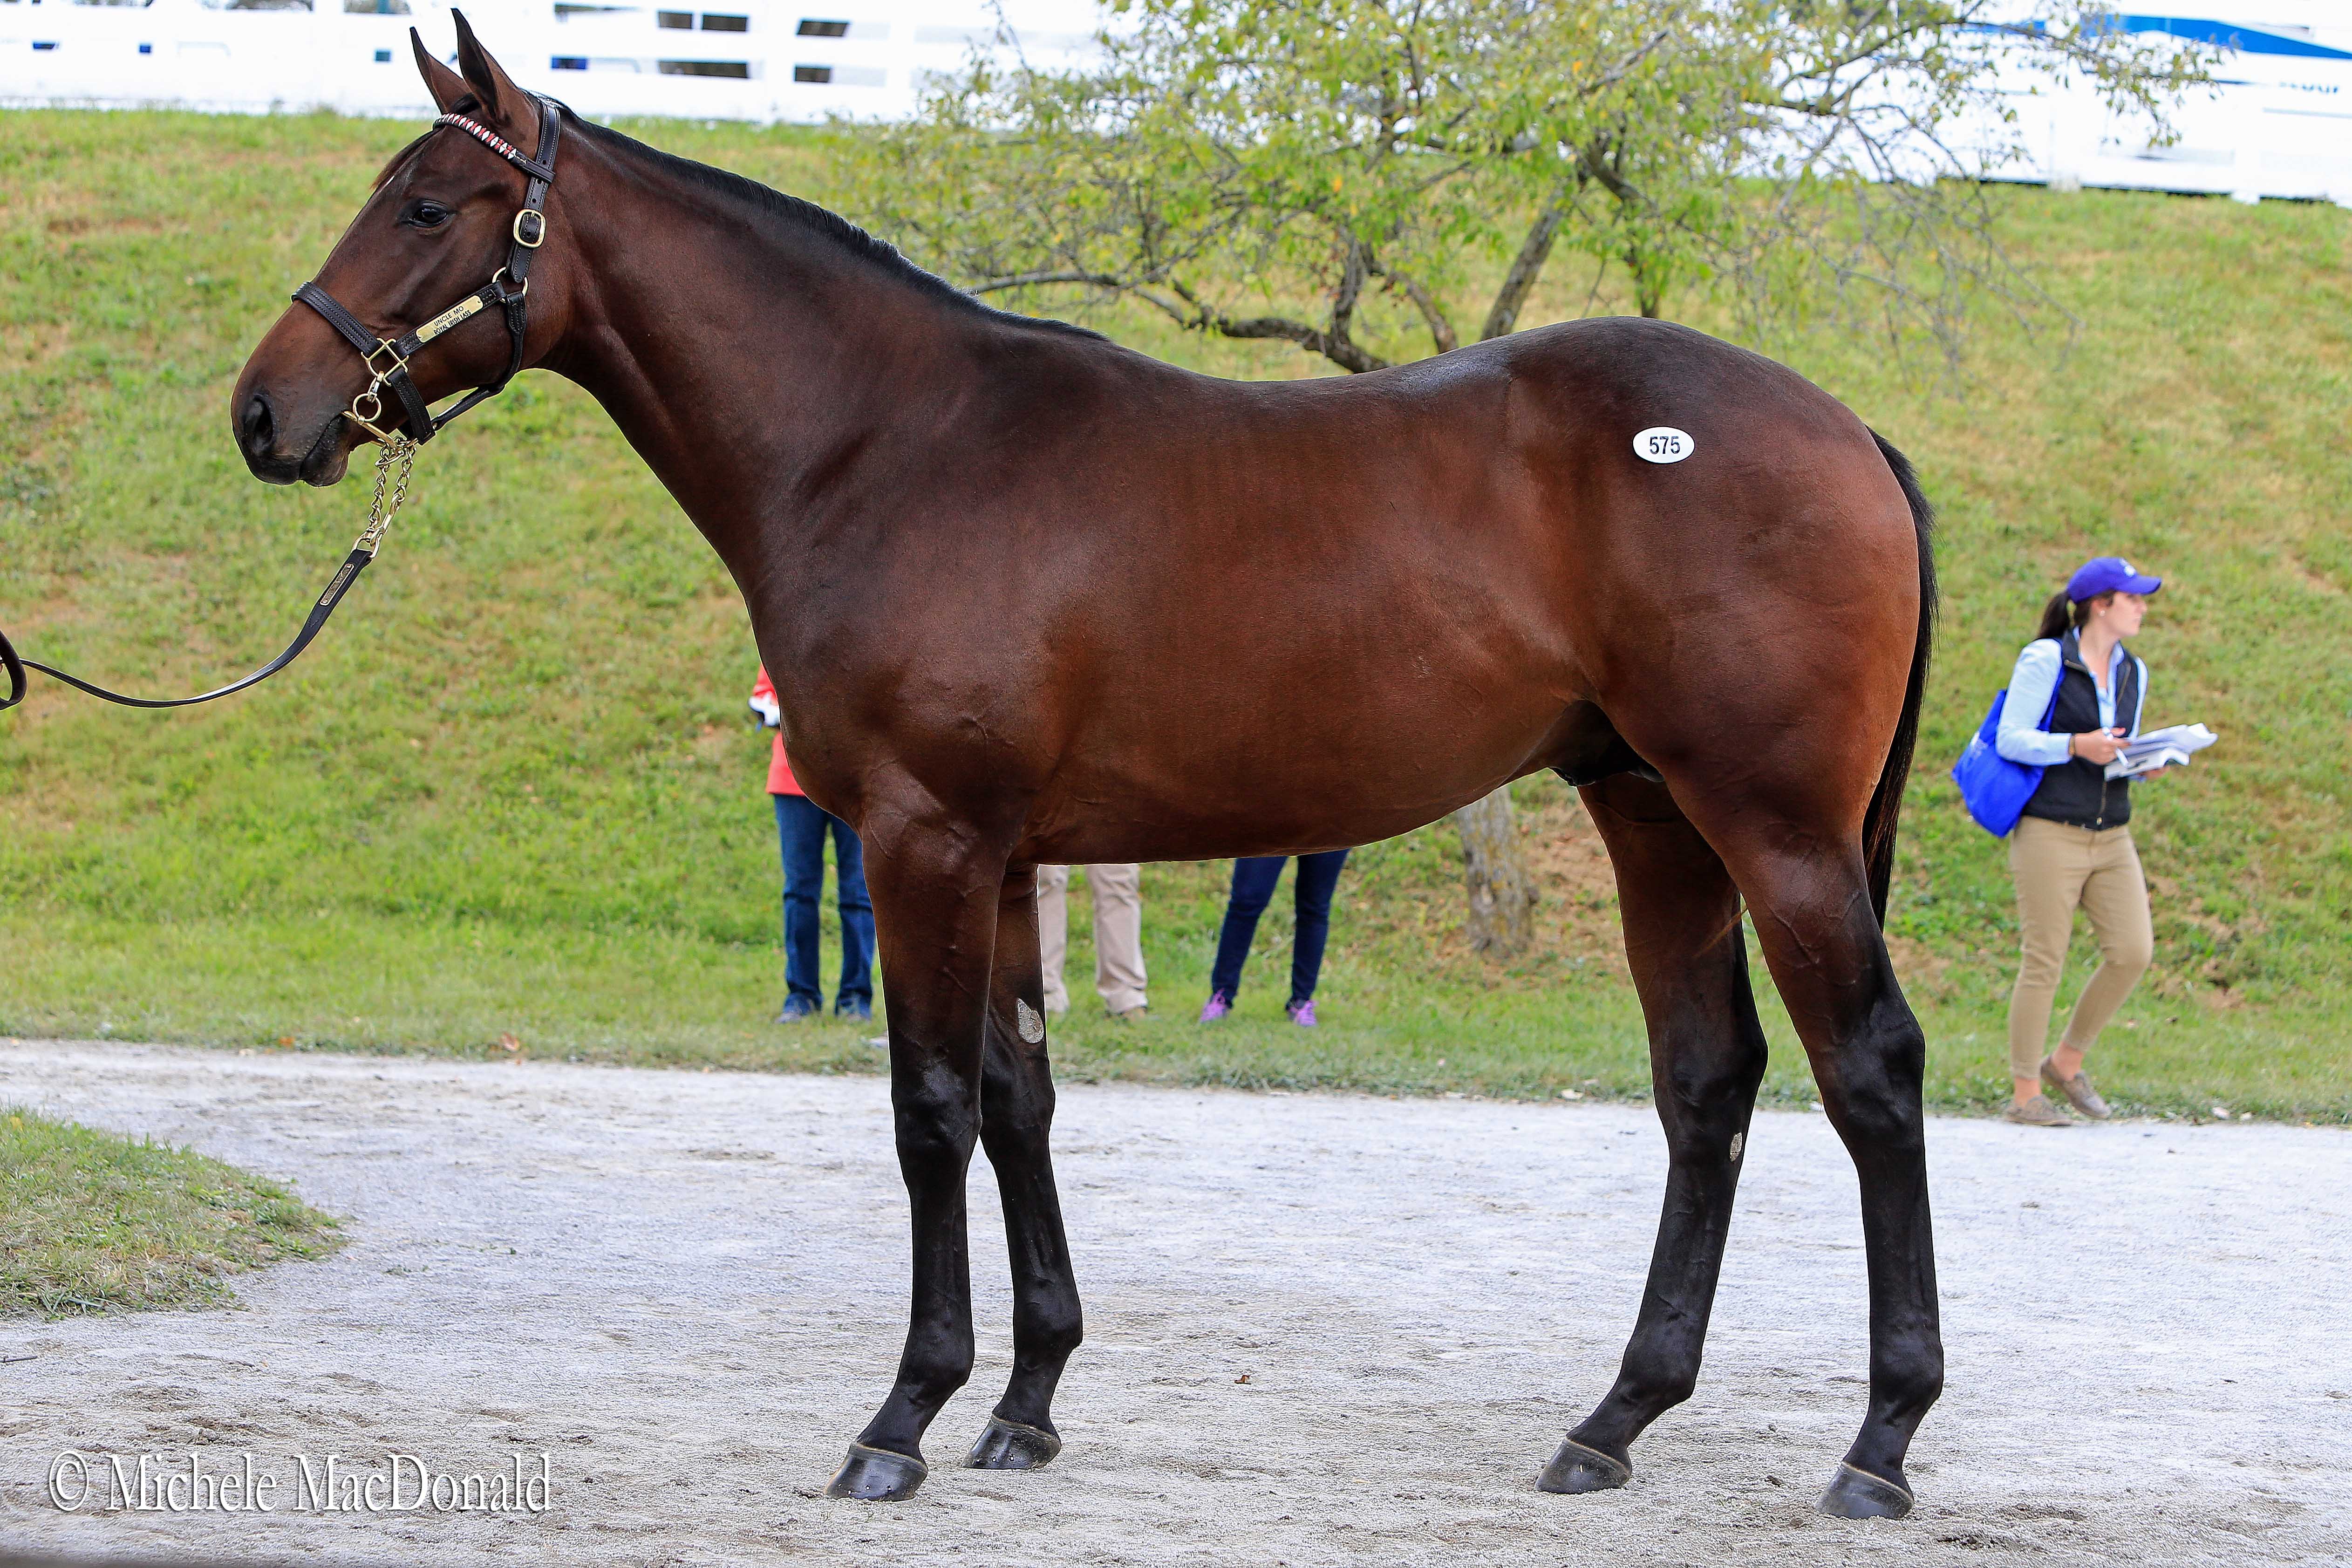 Royal Mo fetched $300,000 as a yearling when he was sold at Keeneland. Photo: Michele MacDonald